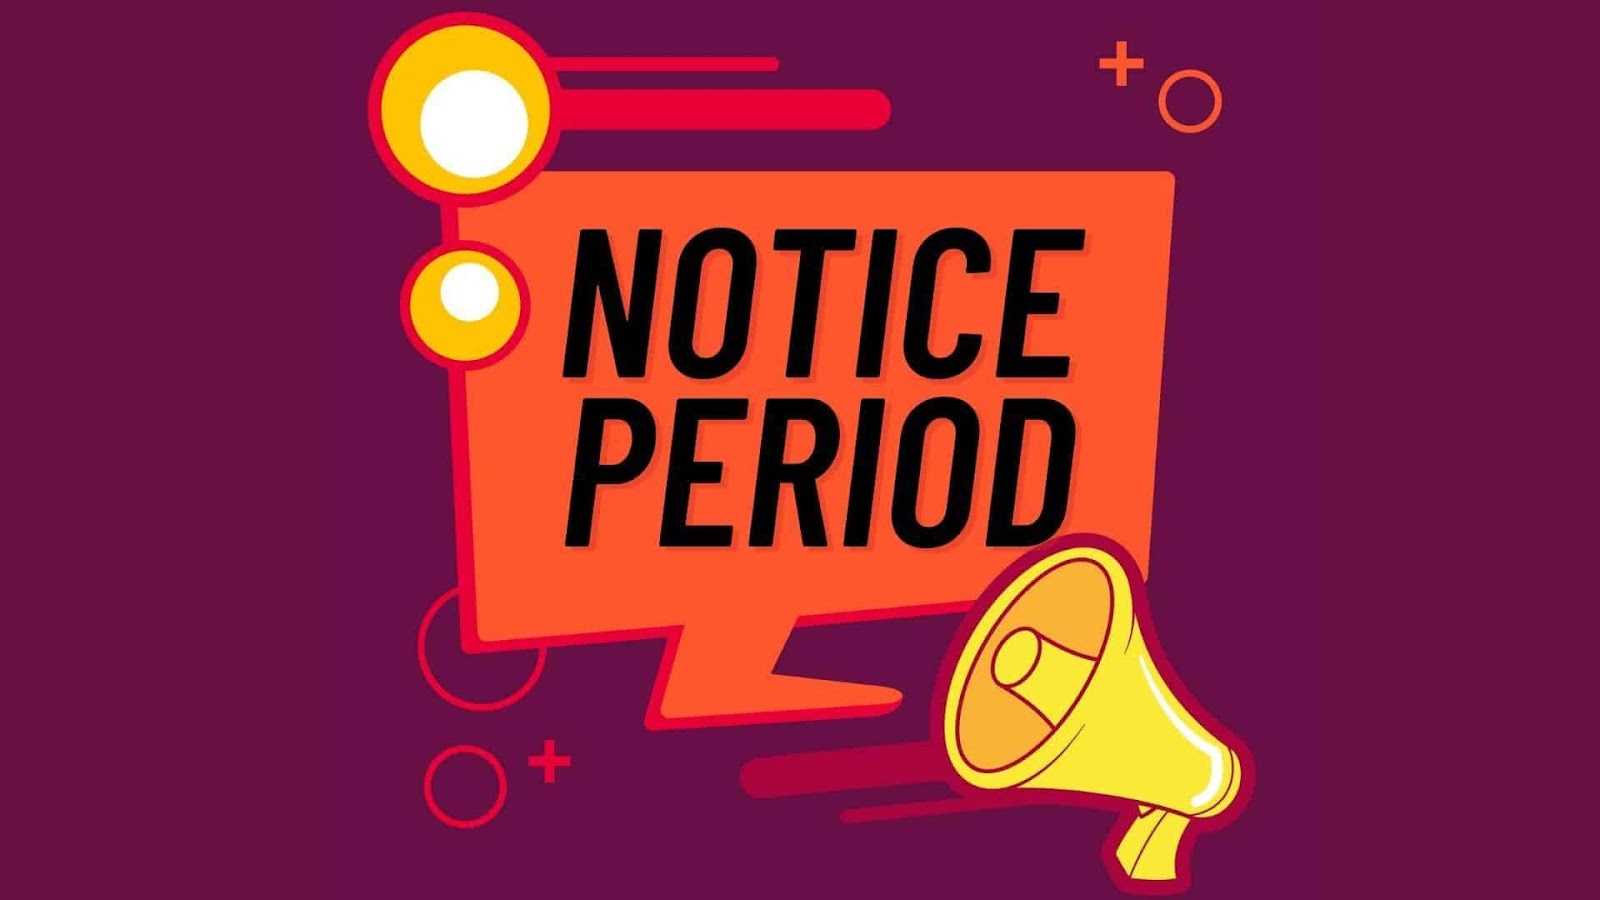 https://www.techsling.com/wp-content/uploads/2019/12/What-is-Notice-Period.jpg